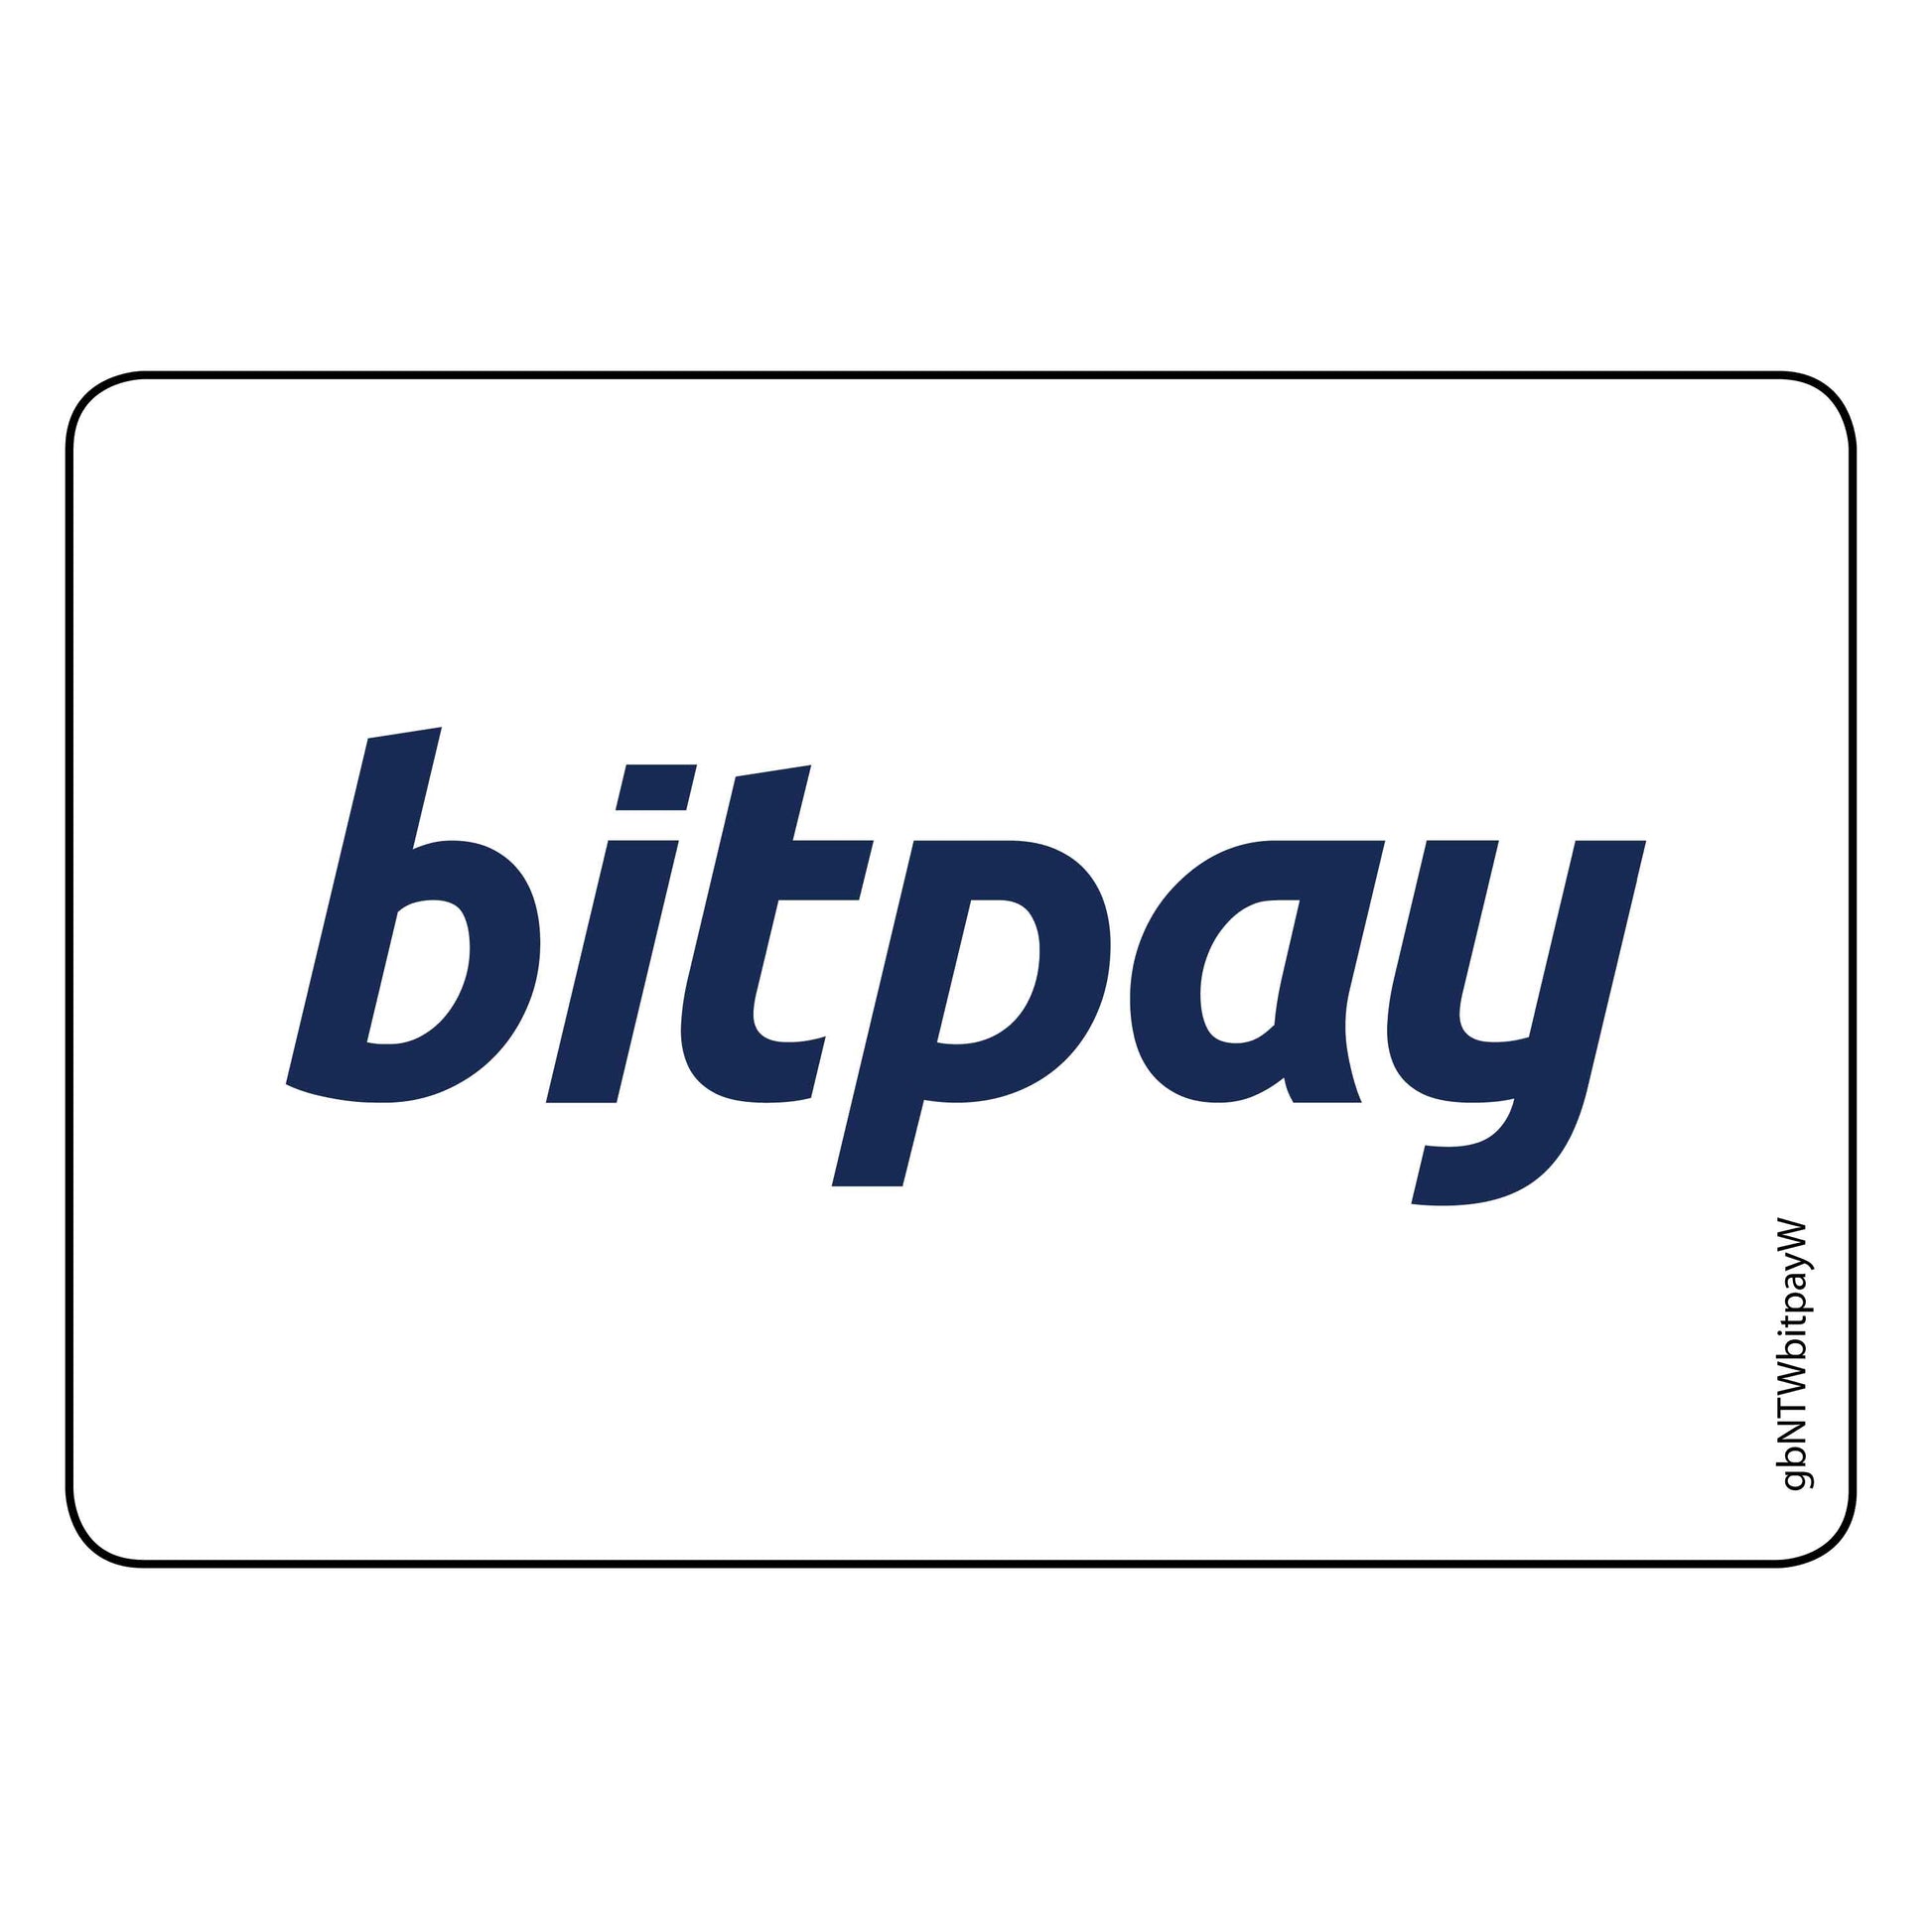 Single Network Decal, Bitpay Decal. 3 inches by 2 inches in size.